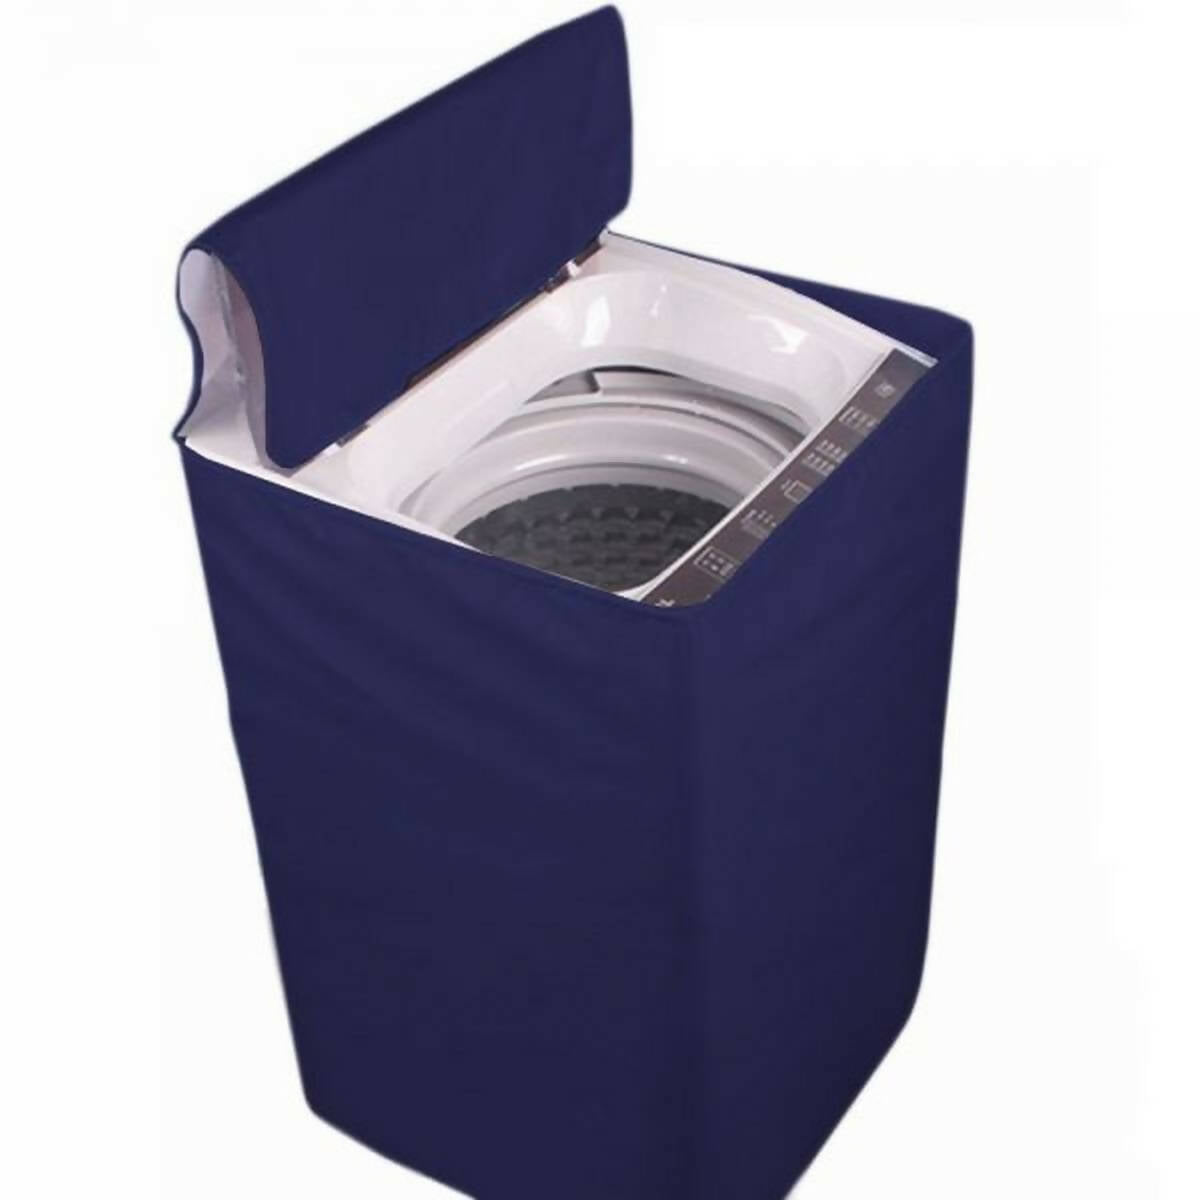 Waterproof Top Loaded Washing Machine Cover 12 to 15 KG